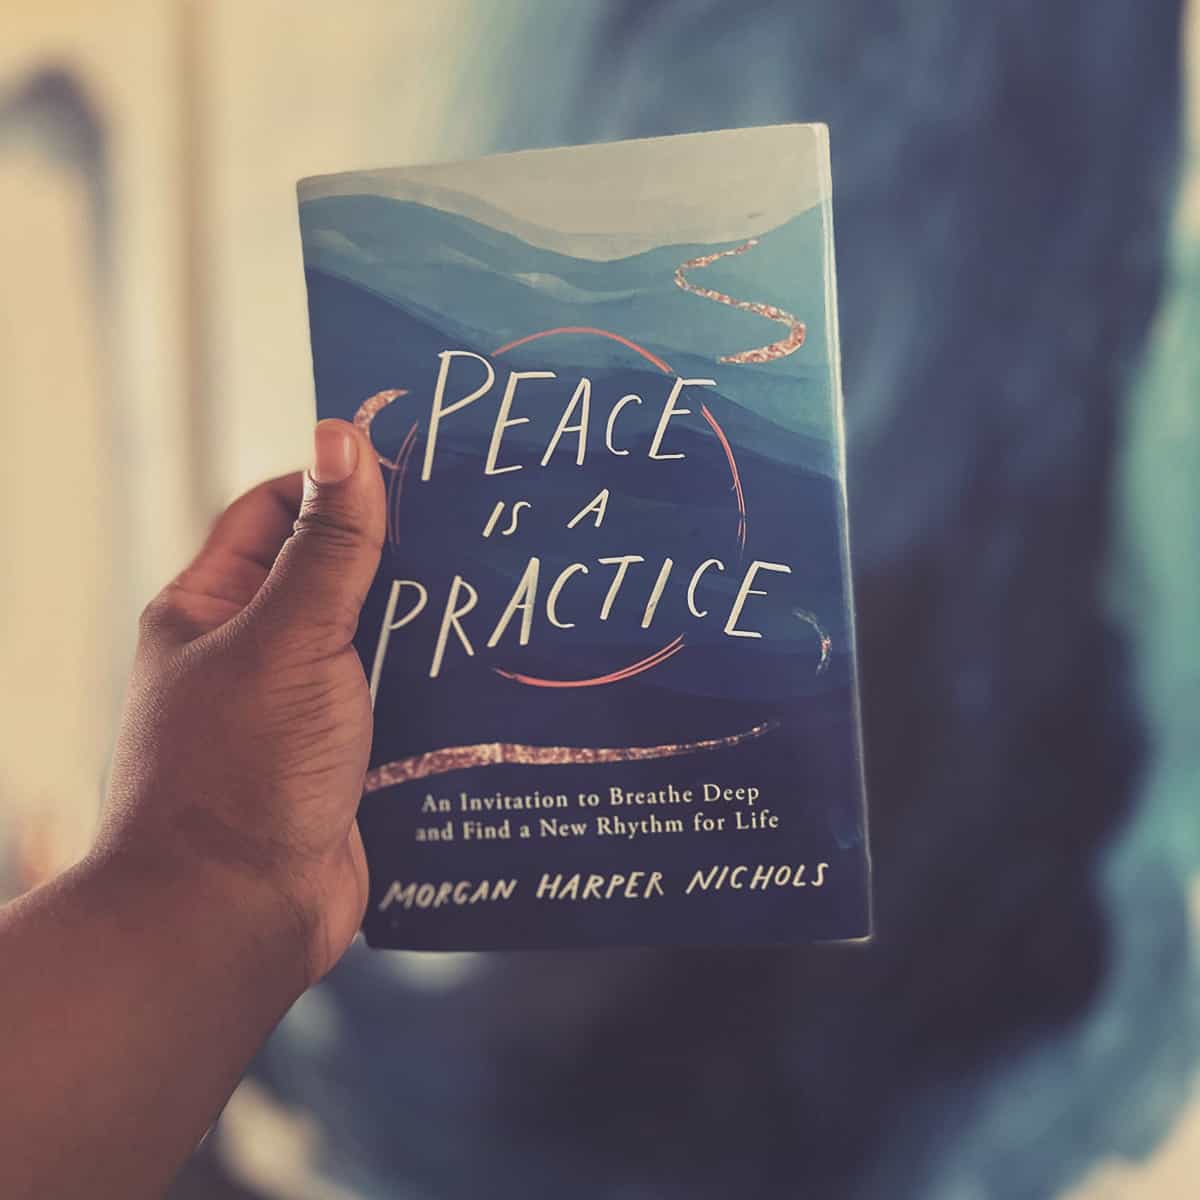 A woman's hand holding up a poetry book titled Peace Is A Practice: An Invitation to Breathe Deep and Find a New Rhythm for Life.